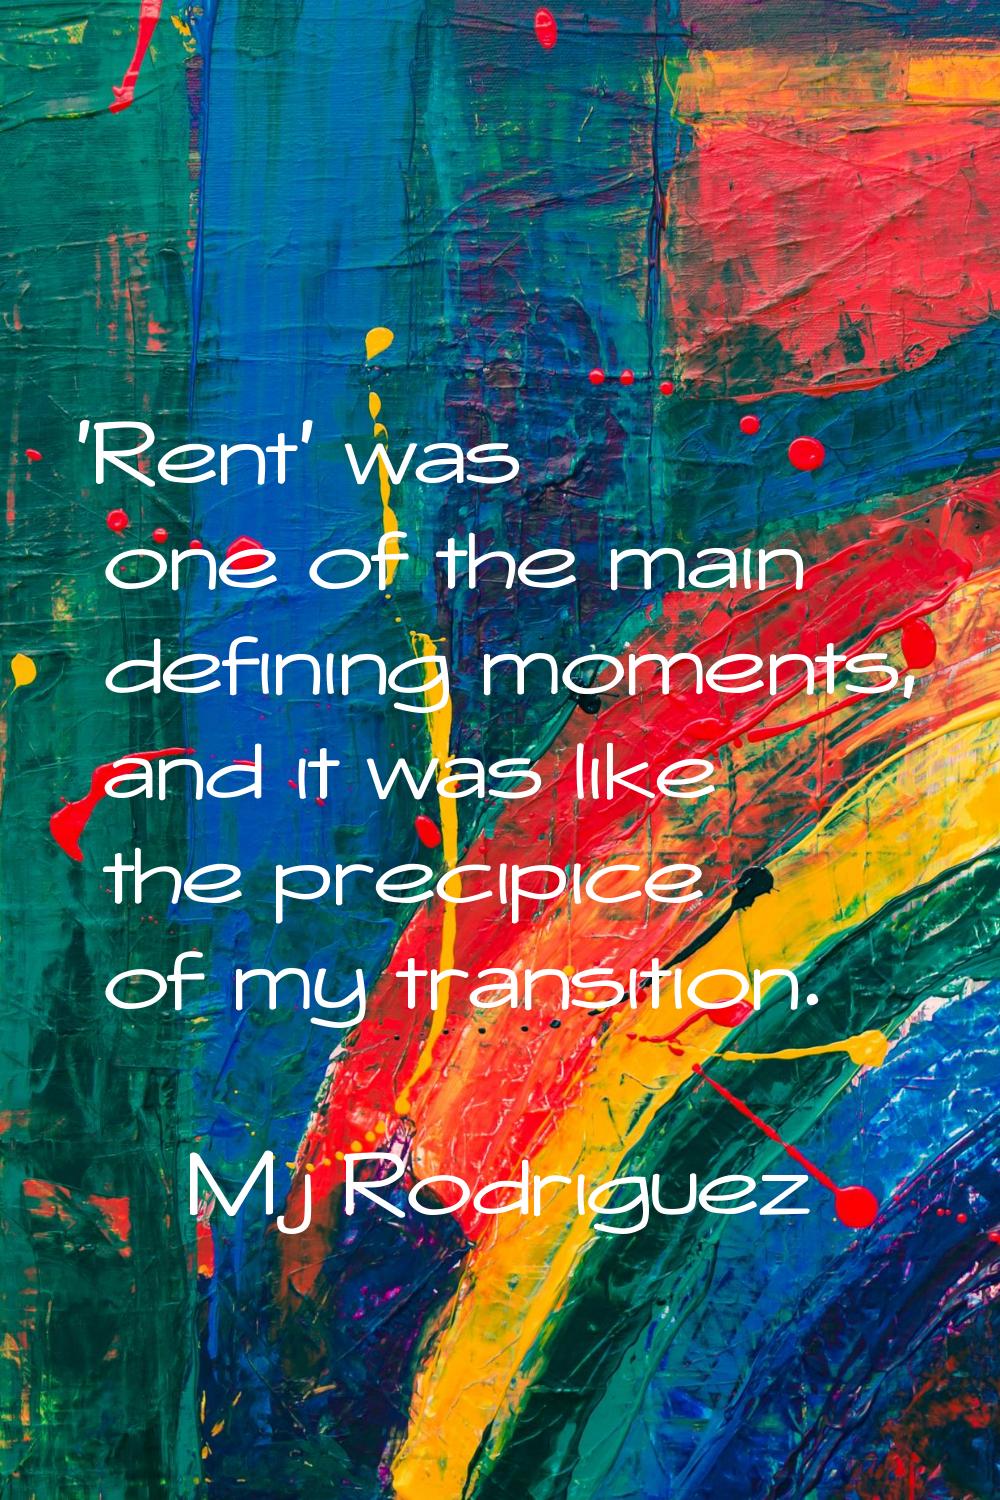 'Rent' was one of the main defining moments, and it was like the precipice of my transition.